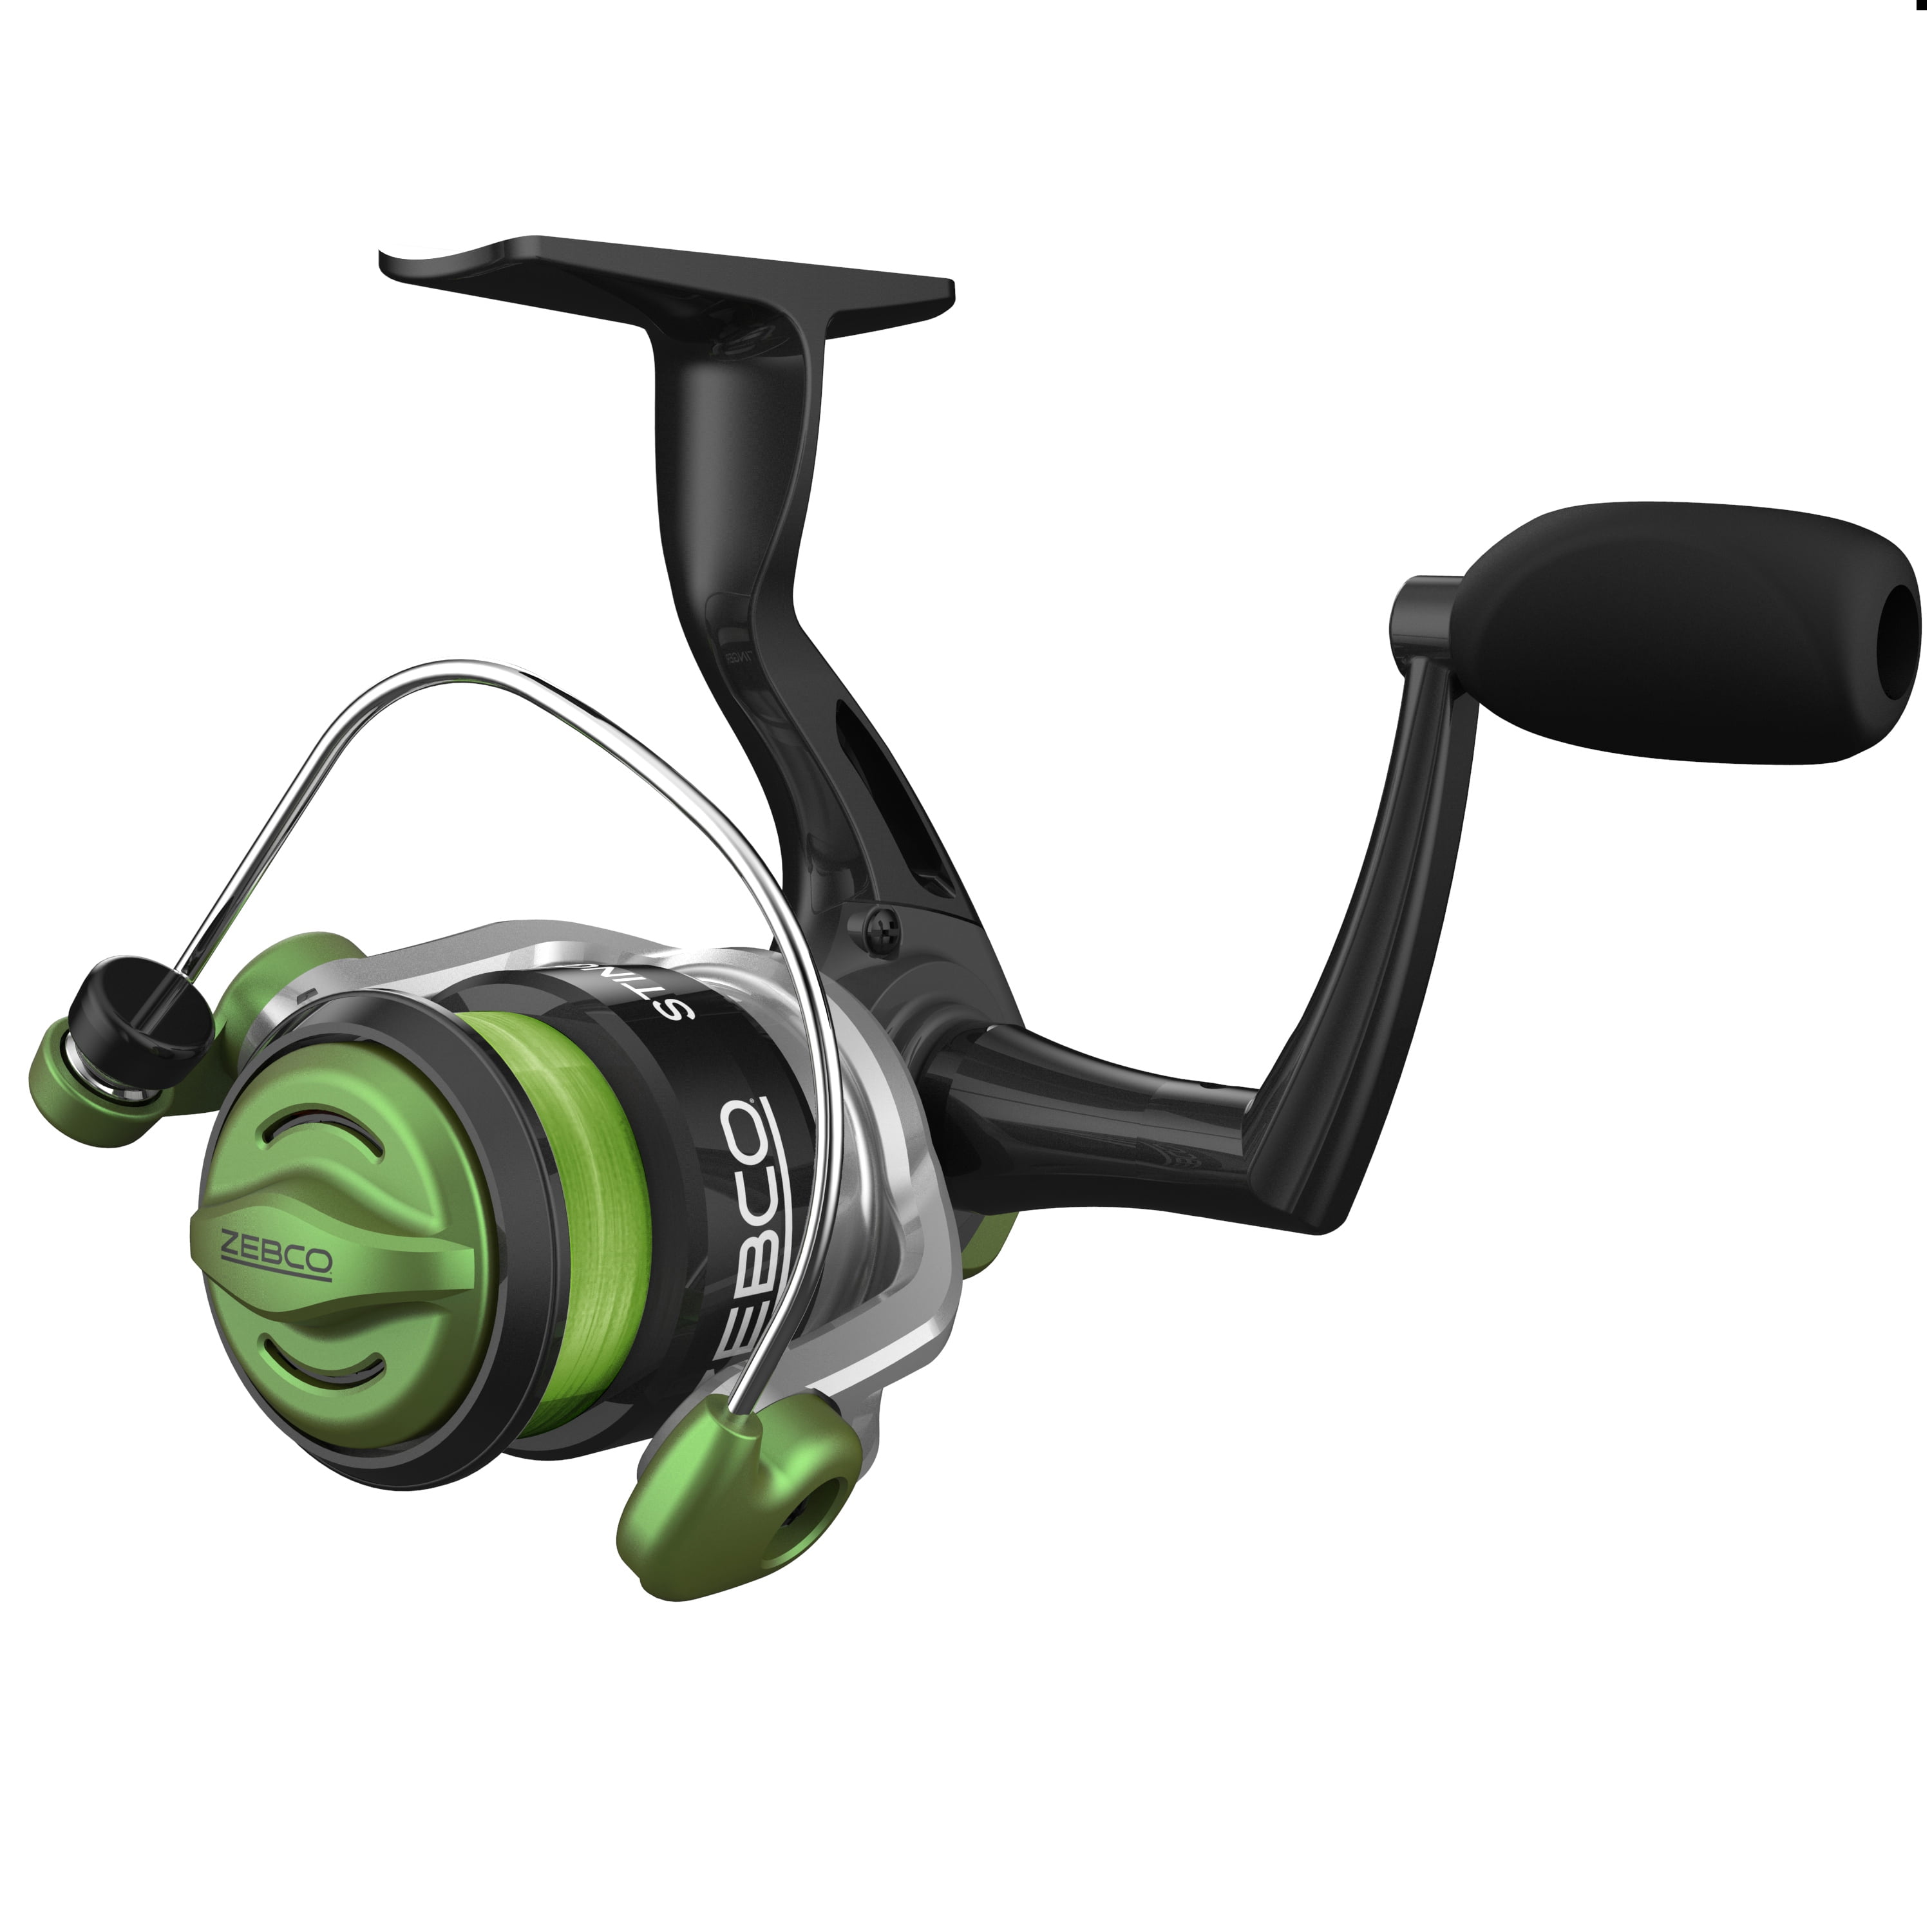 Zebco Stinger Spinning Fishing Reel, Size 30 Changeable Right- or Left-Hand  Retrieve, All-Metal Gears, Ball Bearing System, Pre-Spooled with 10-Pound